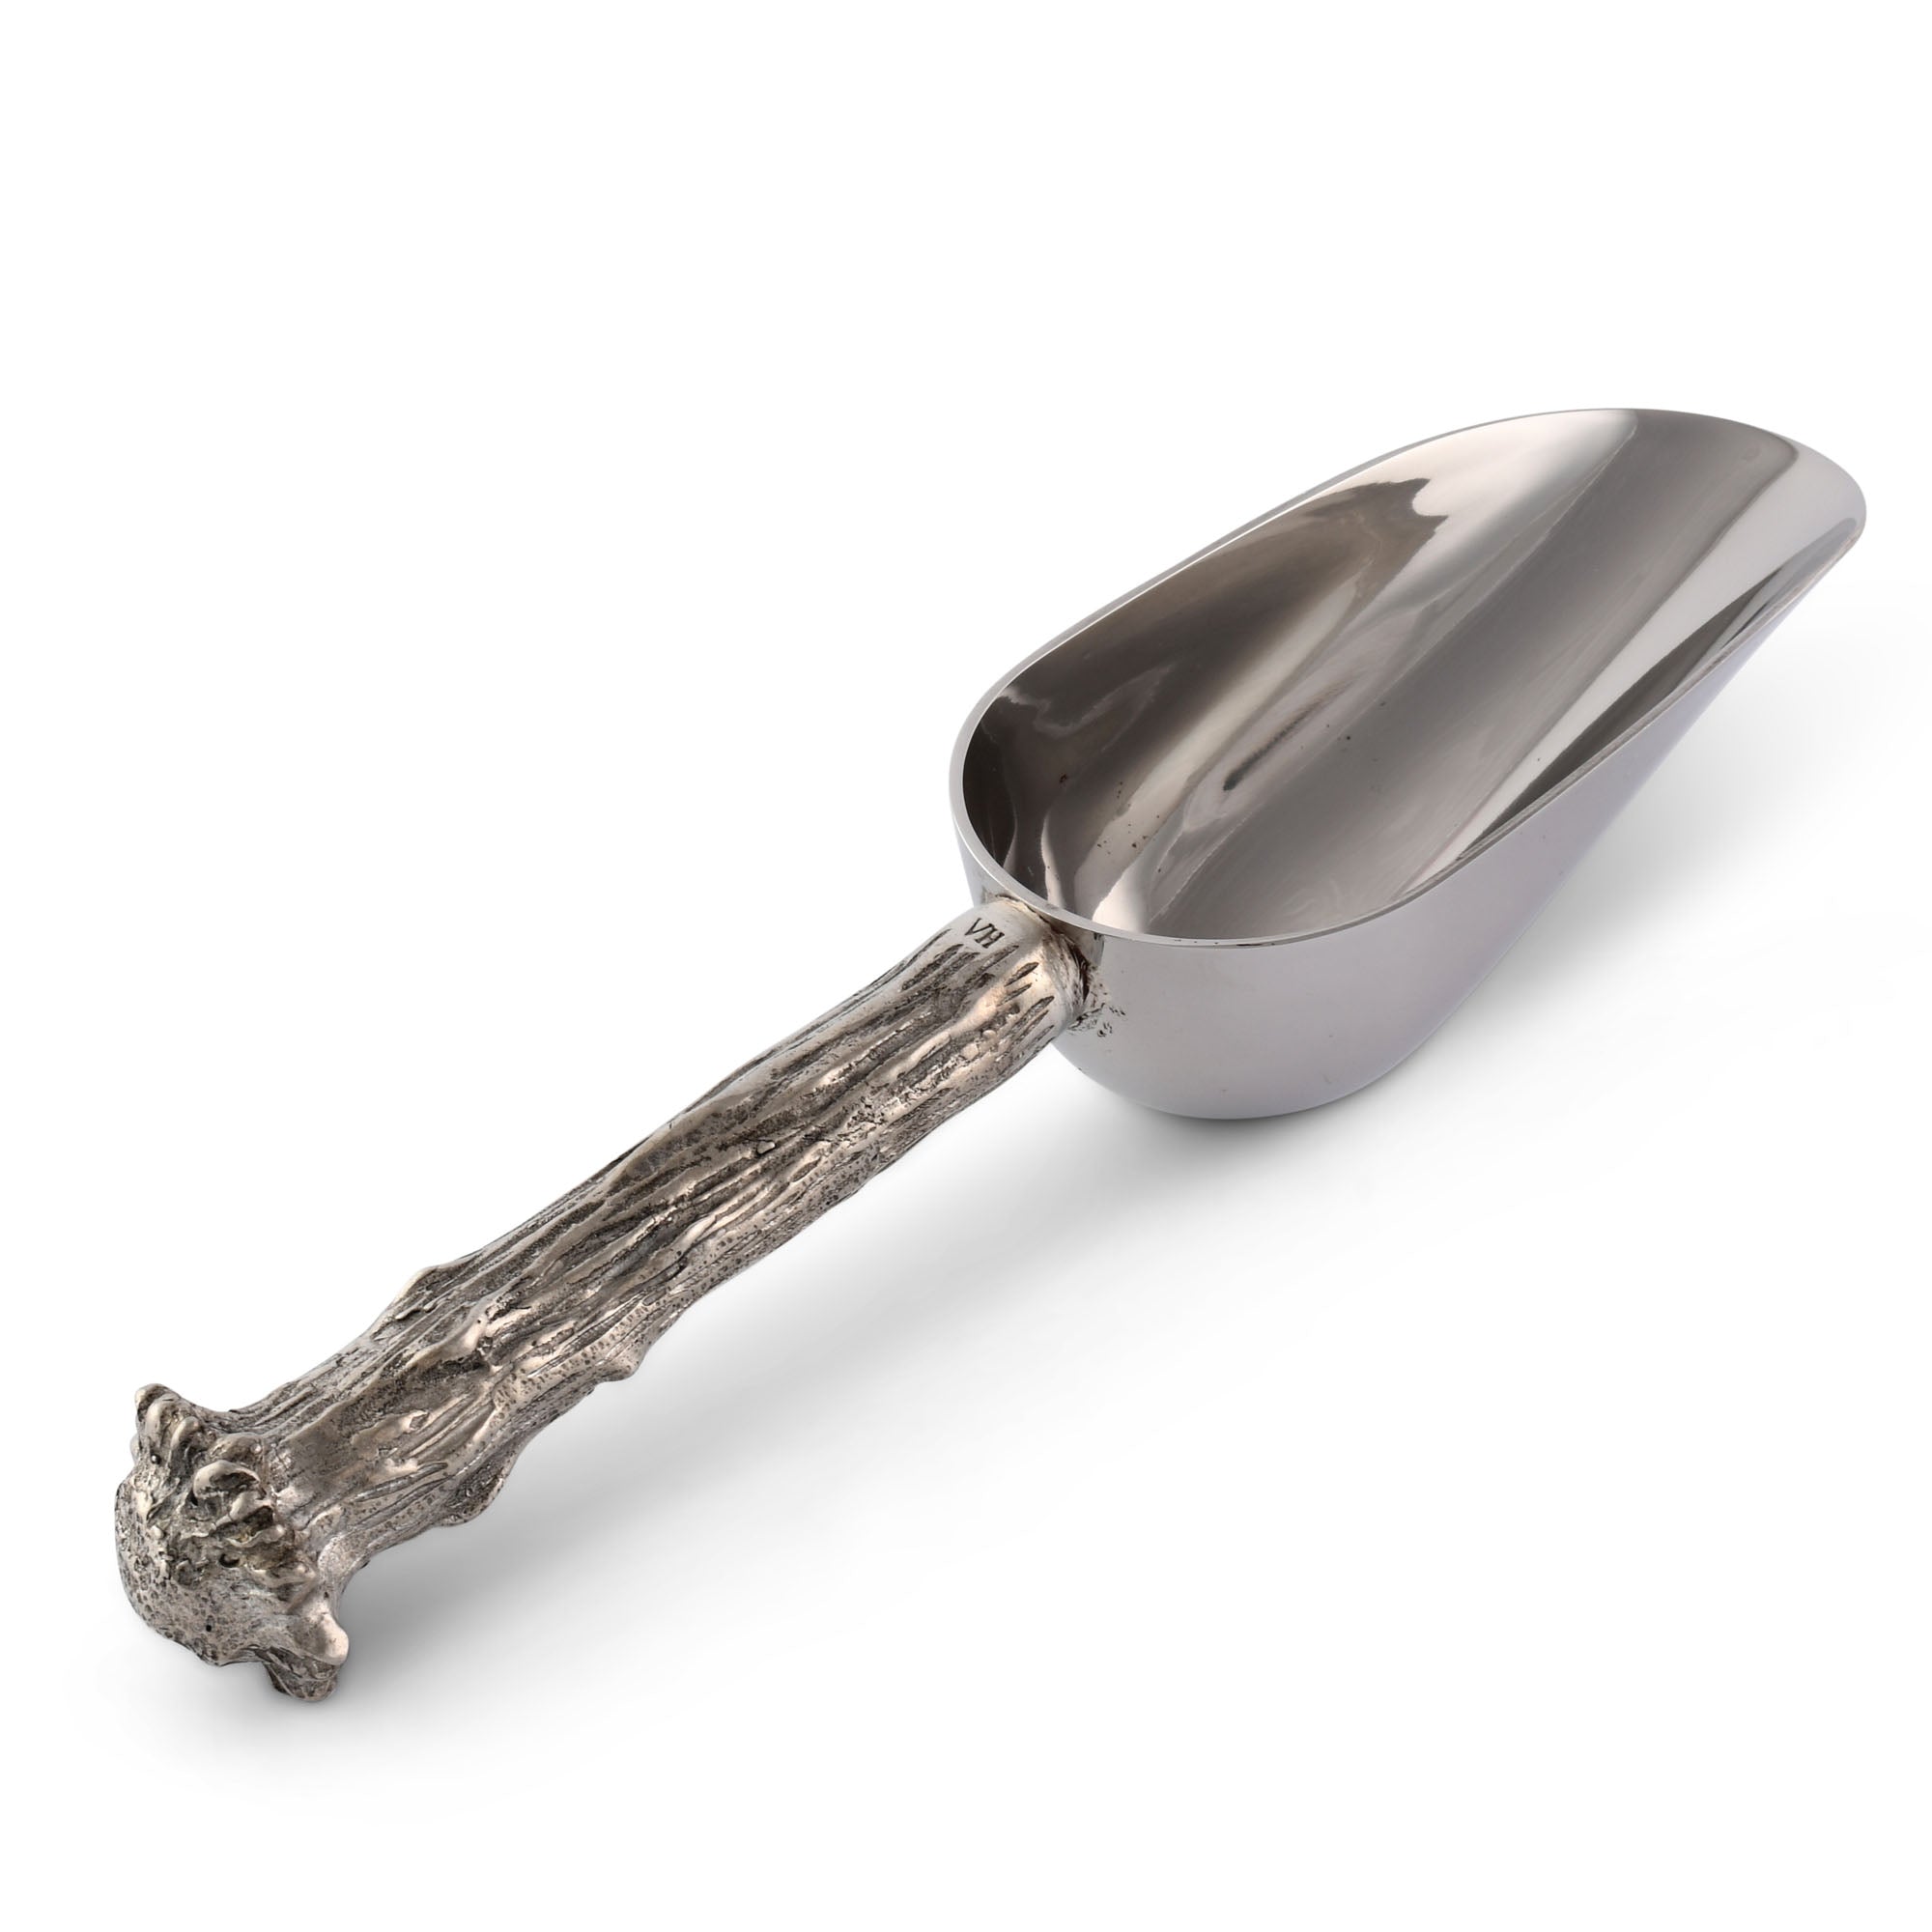 Vagabond House Pewter Antler Ice Scoop Product Image